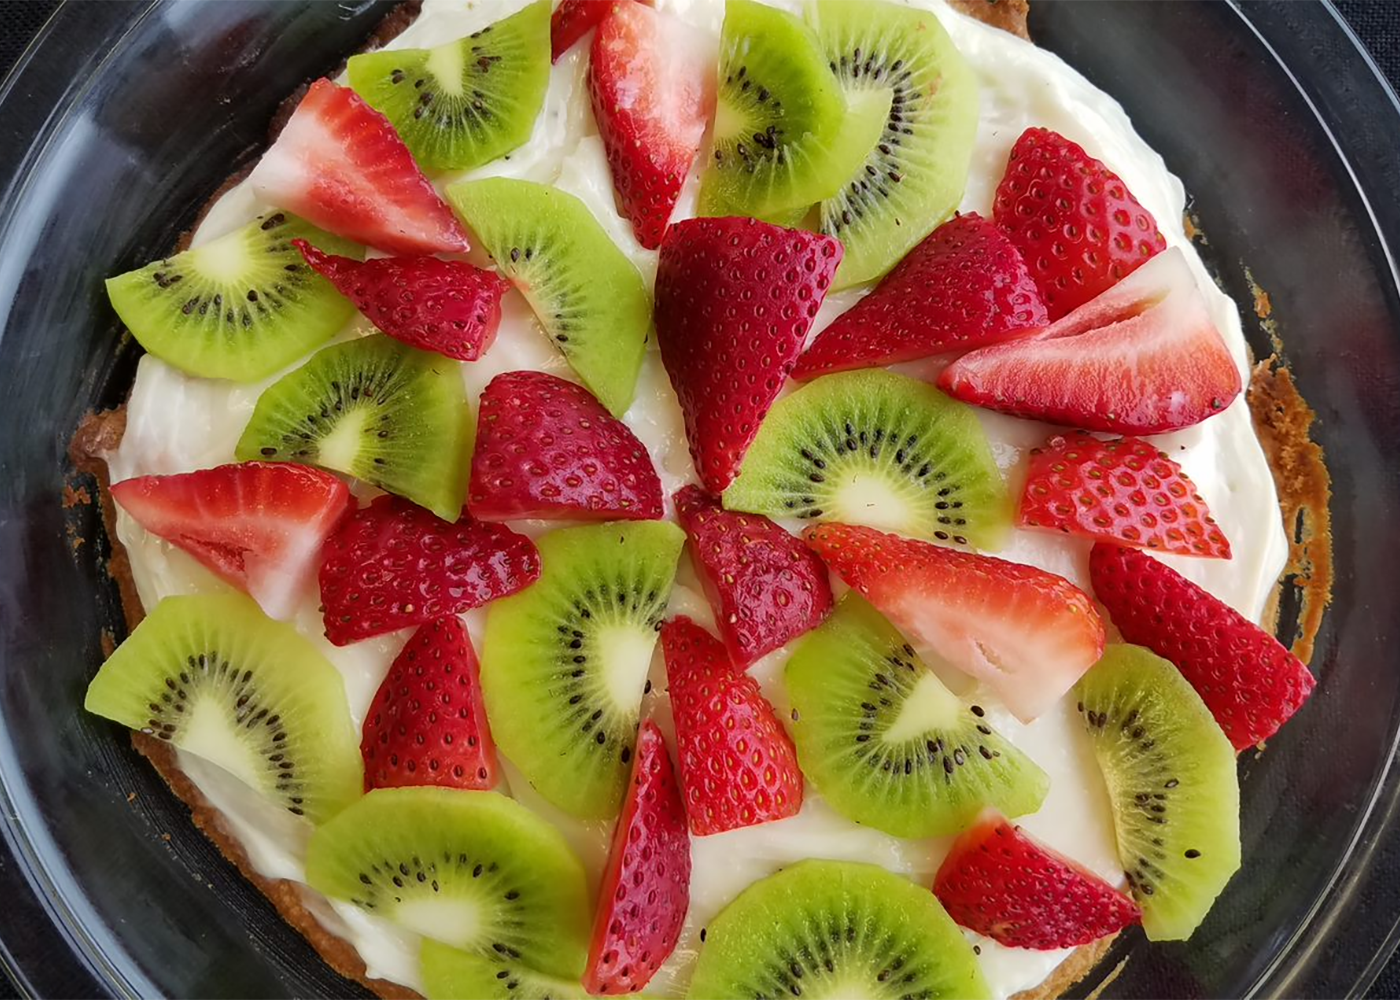 Fruit Pizza with sliced kiwifruit and strawberries.